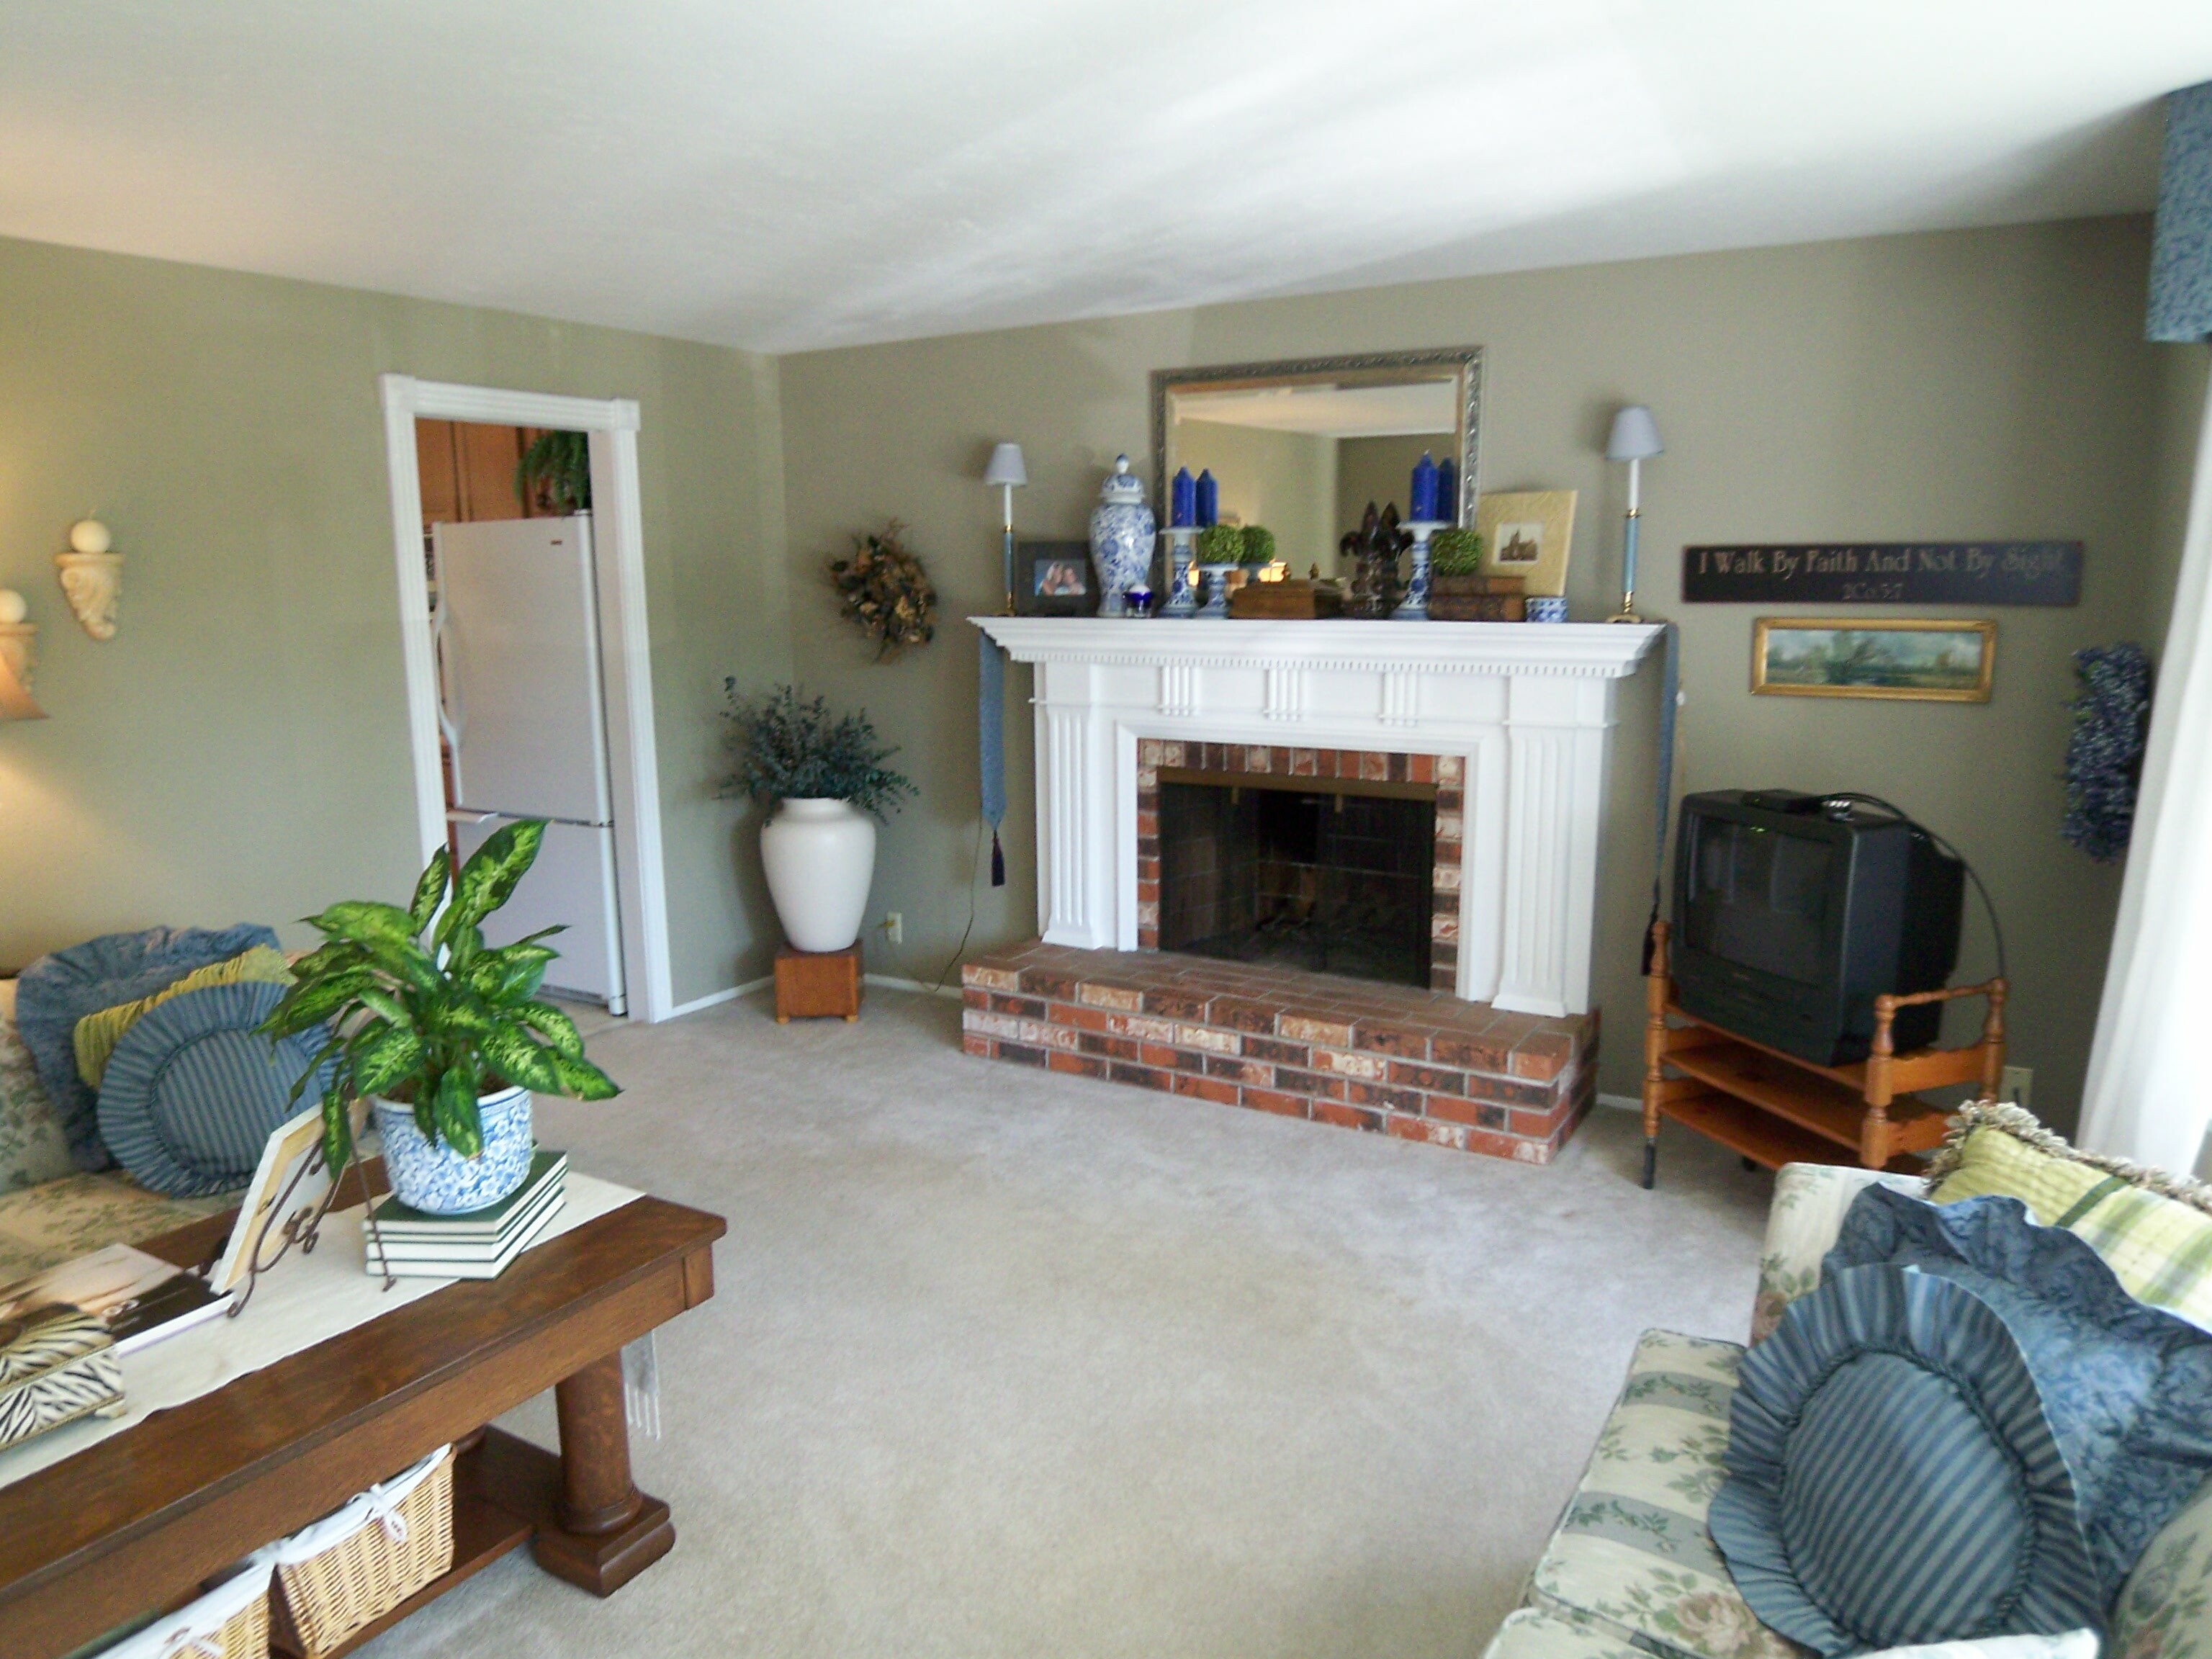 Property Photo: Living room 19915 2nd Ave NW  WA 98177 